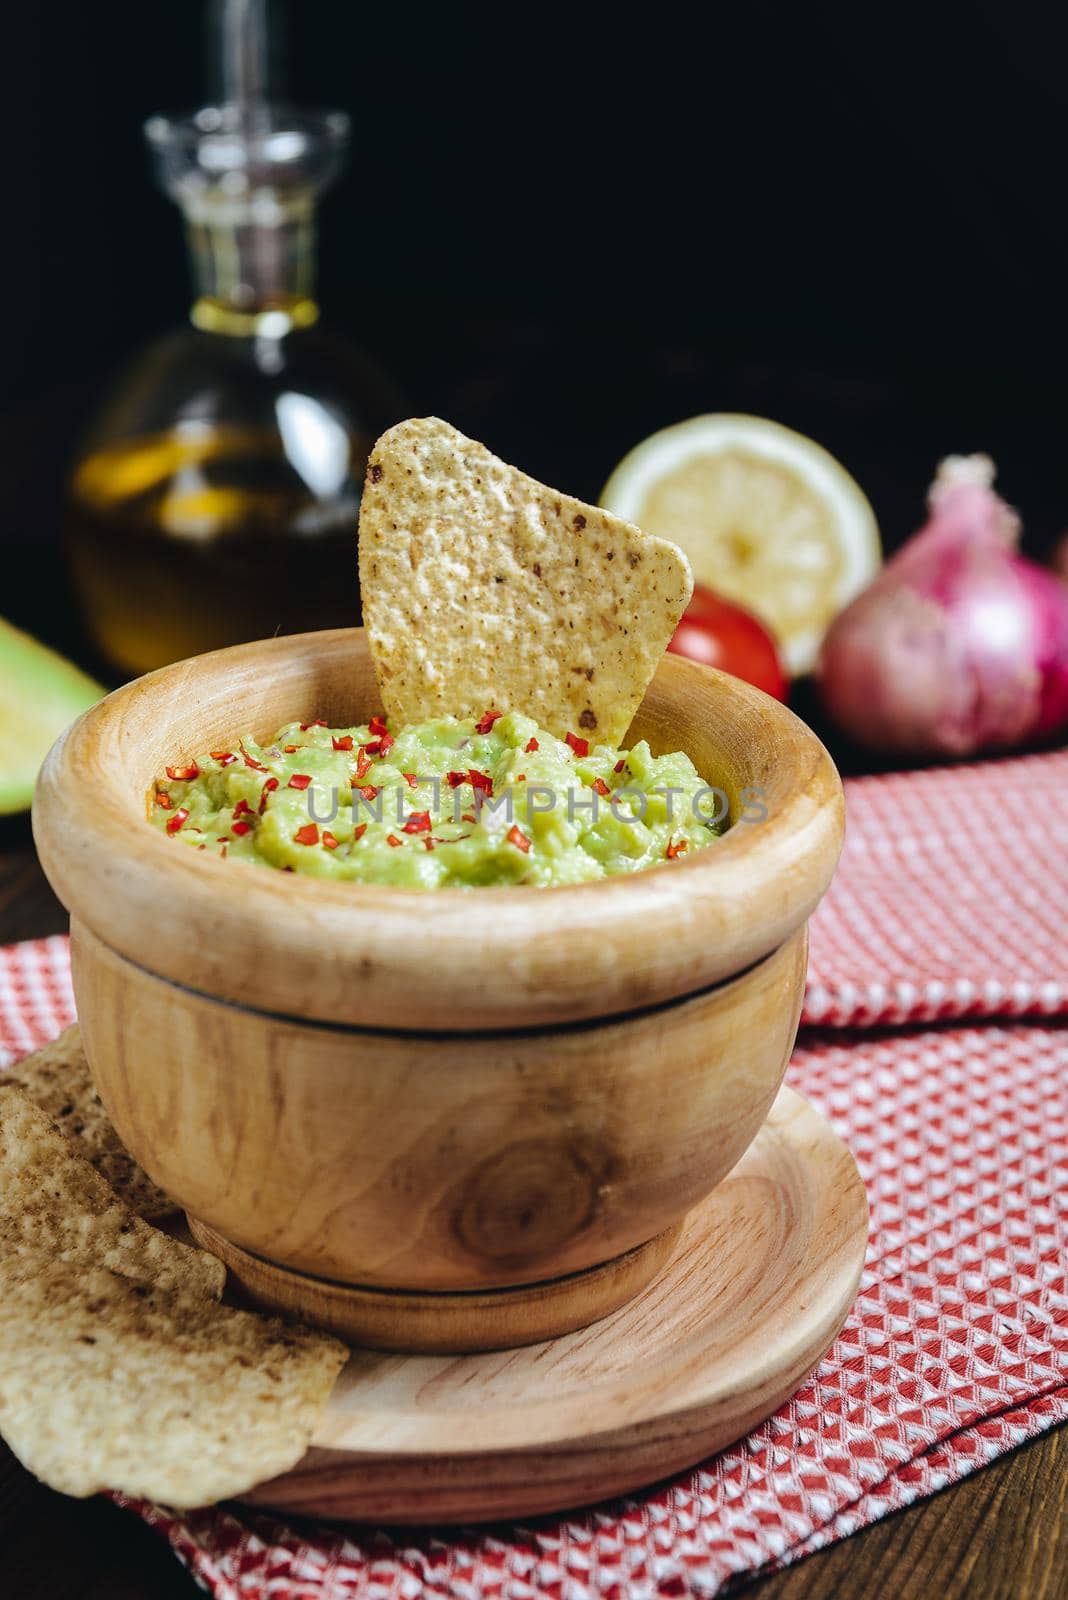 homemade guacamole in a wood bowl with nachos next to avocado and other ingredients, typical mexican healthy vegan cuisine with rustic dark food photo style